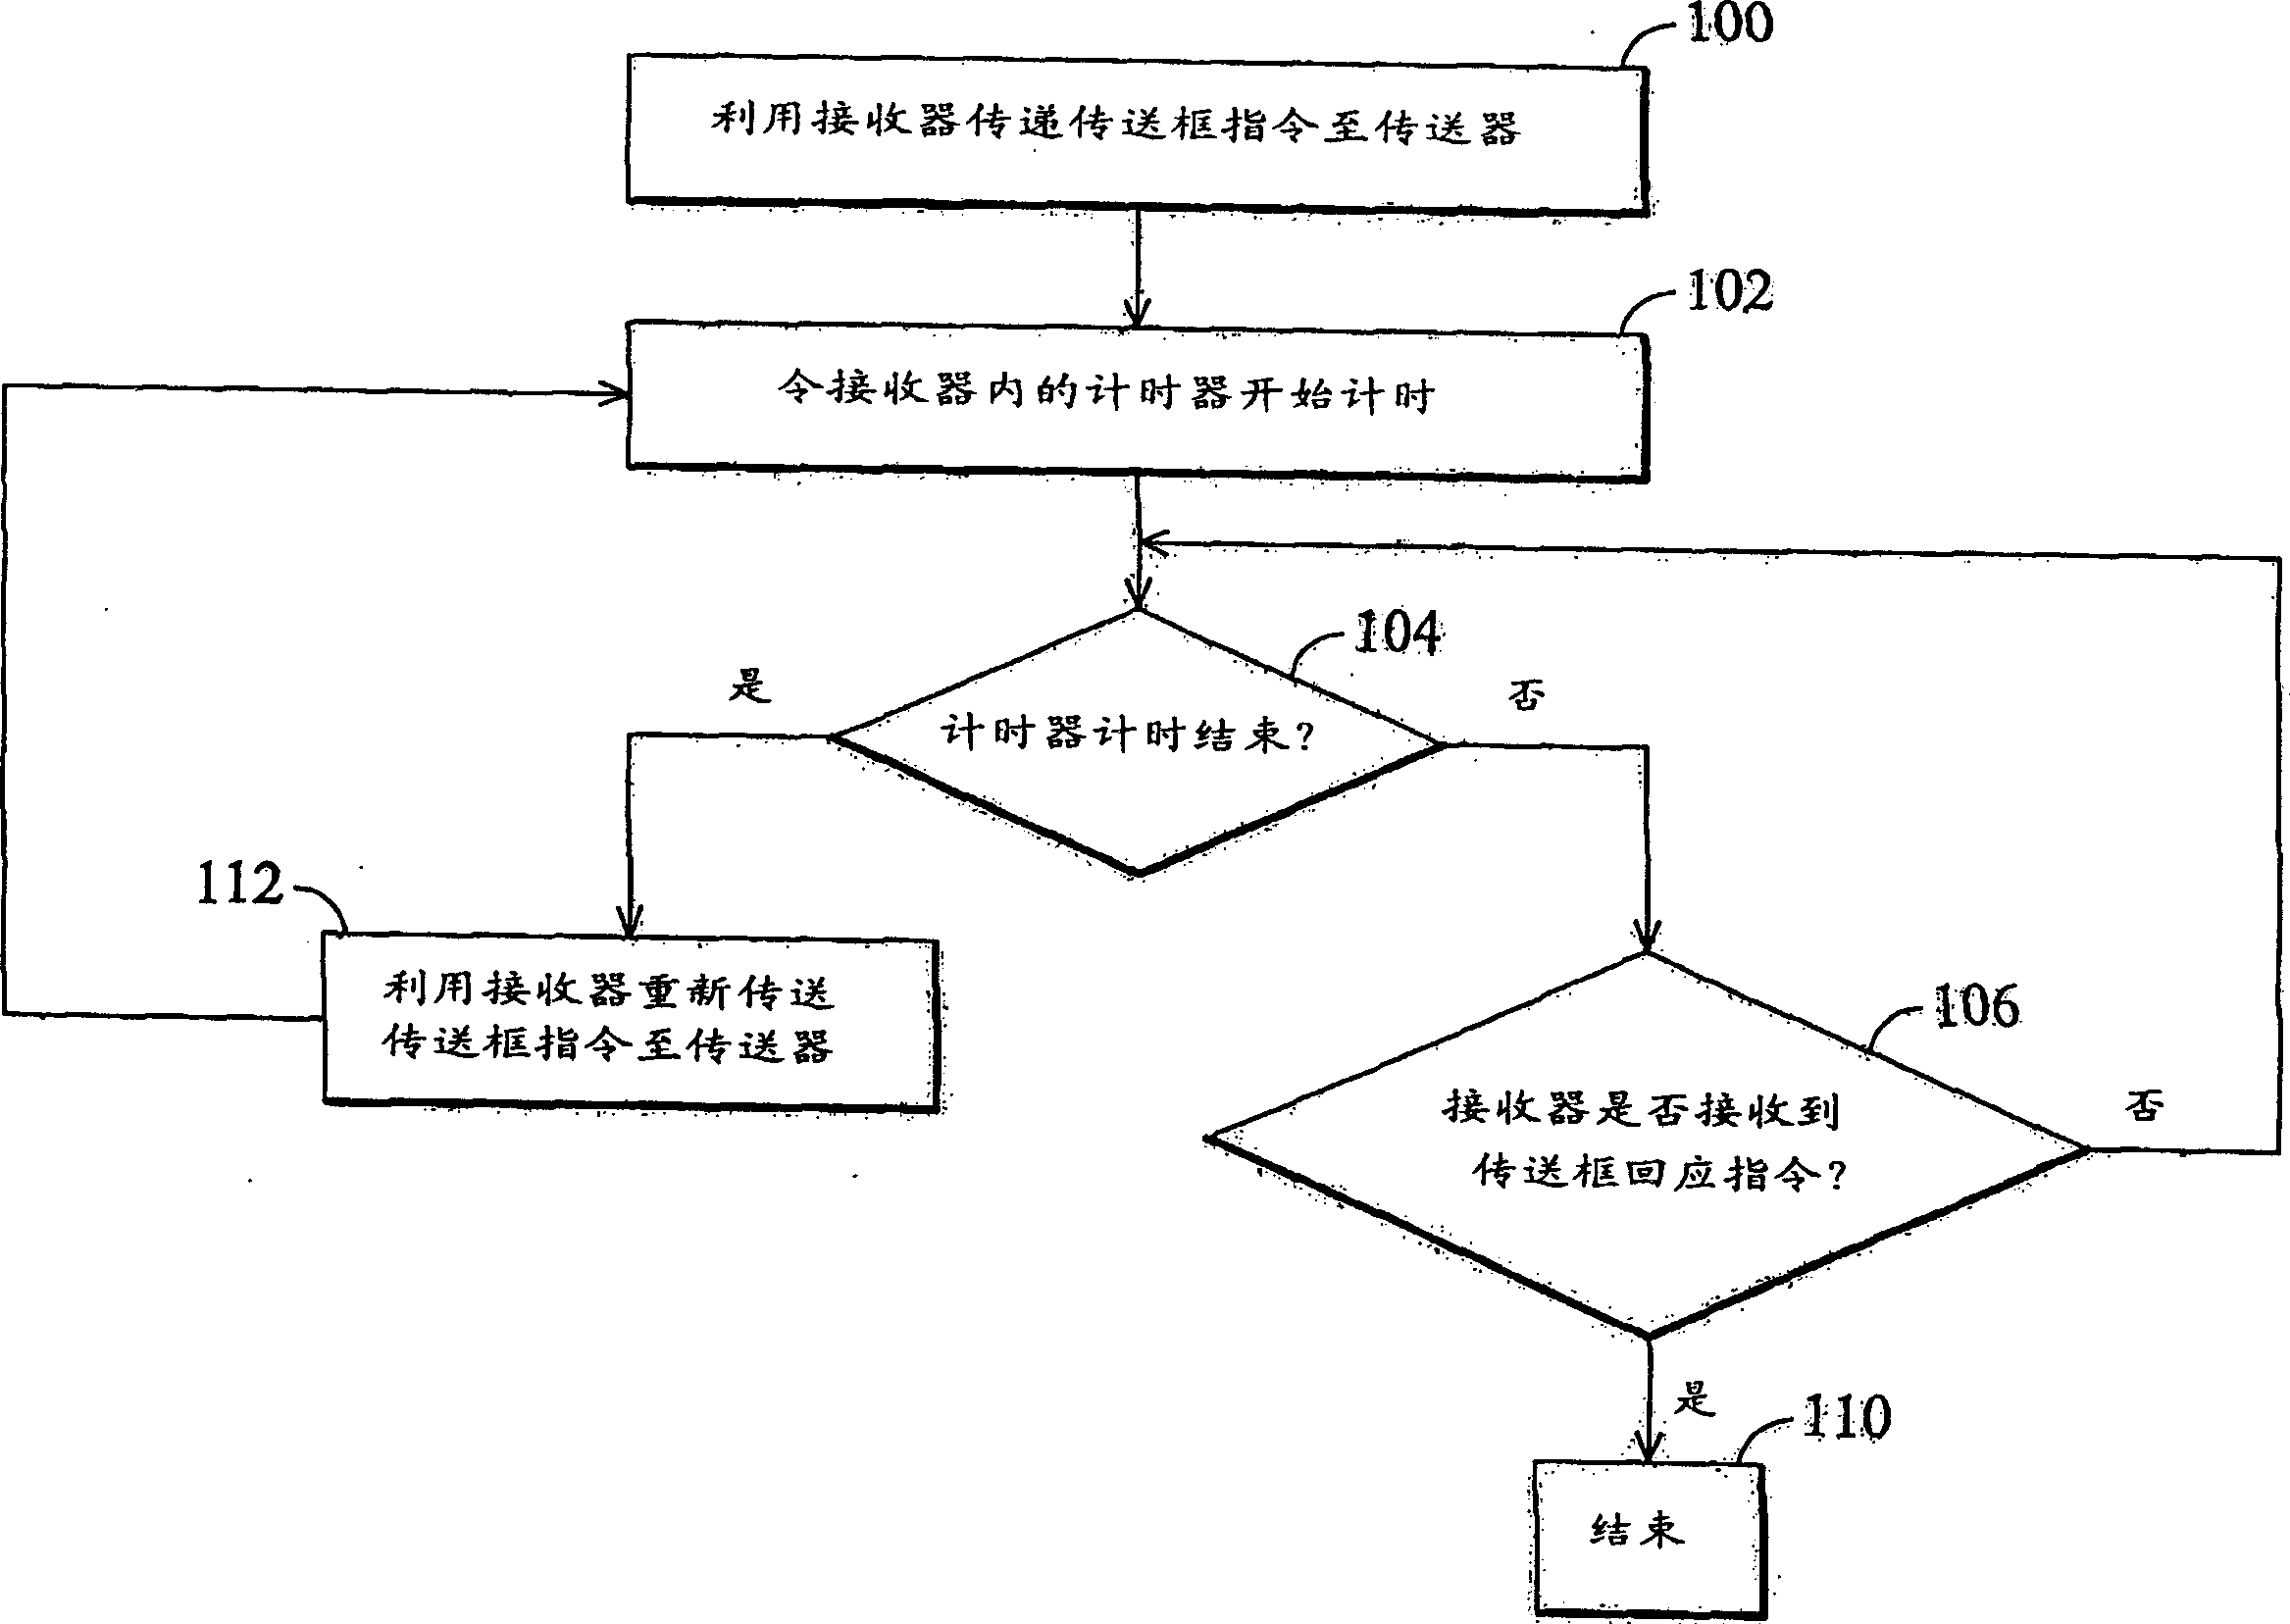 Method of controlling a receiver and a transmitter to handle a transmission window size change procedure